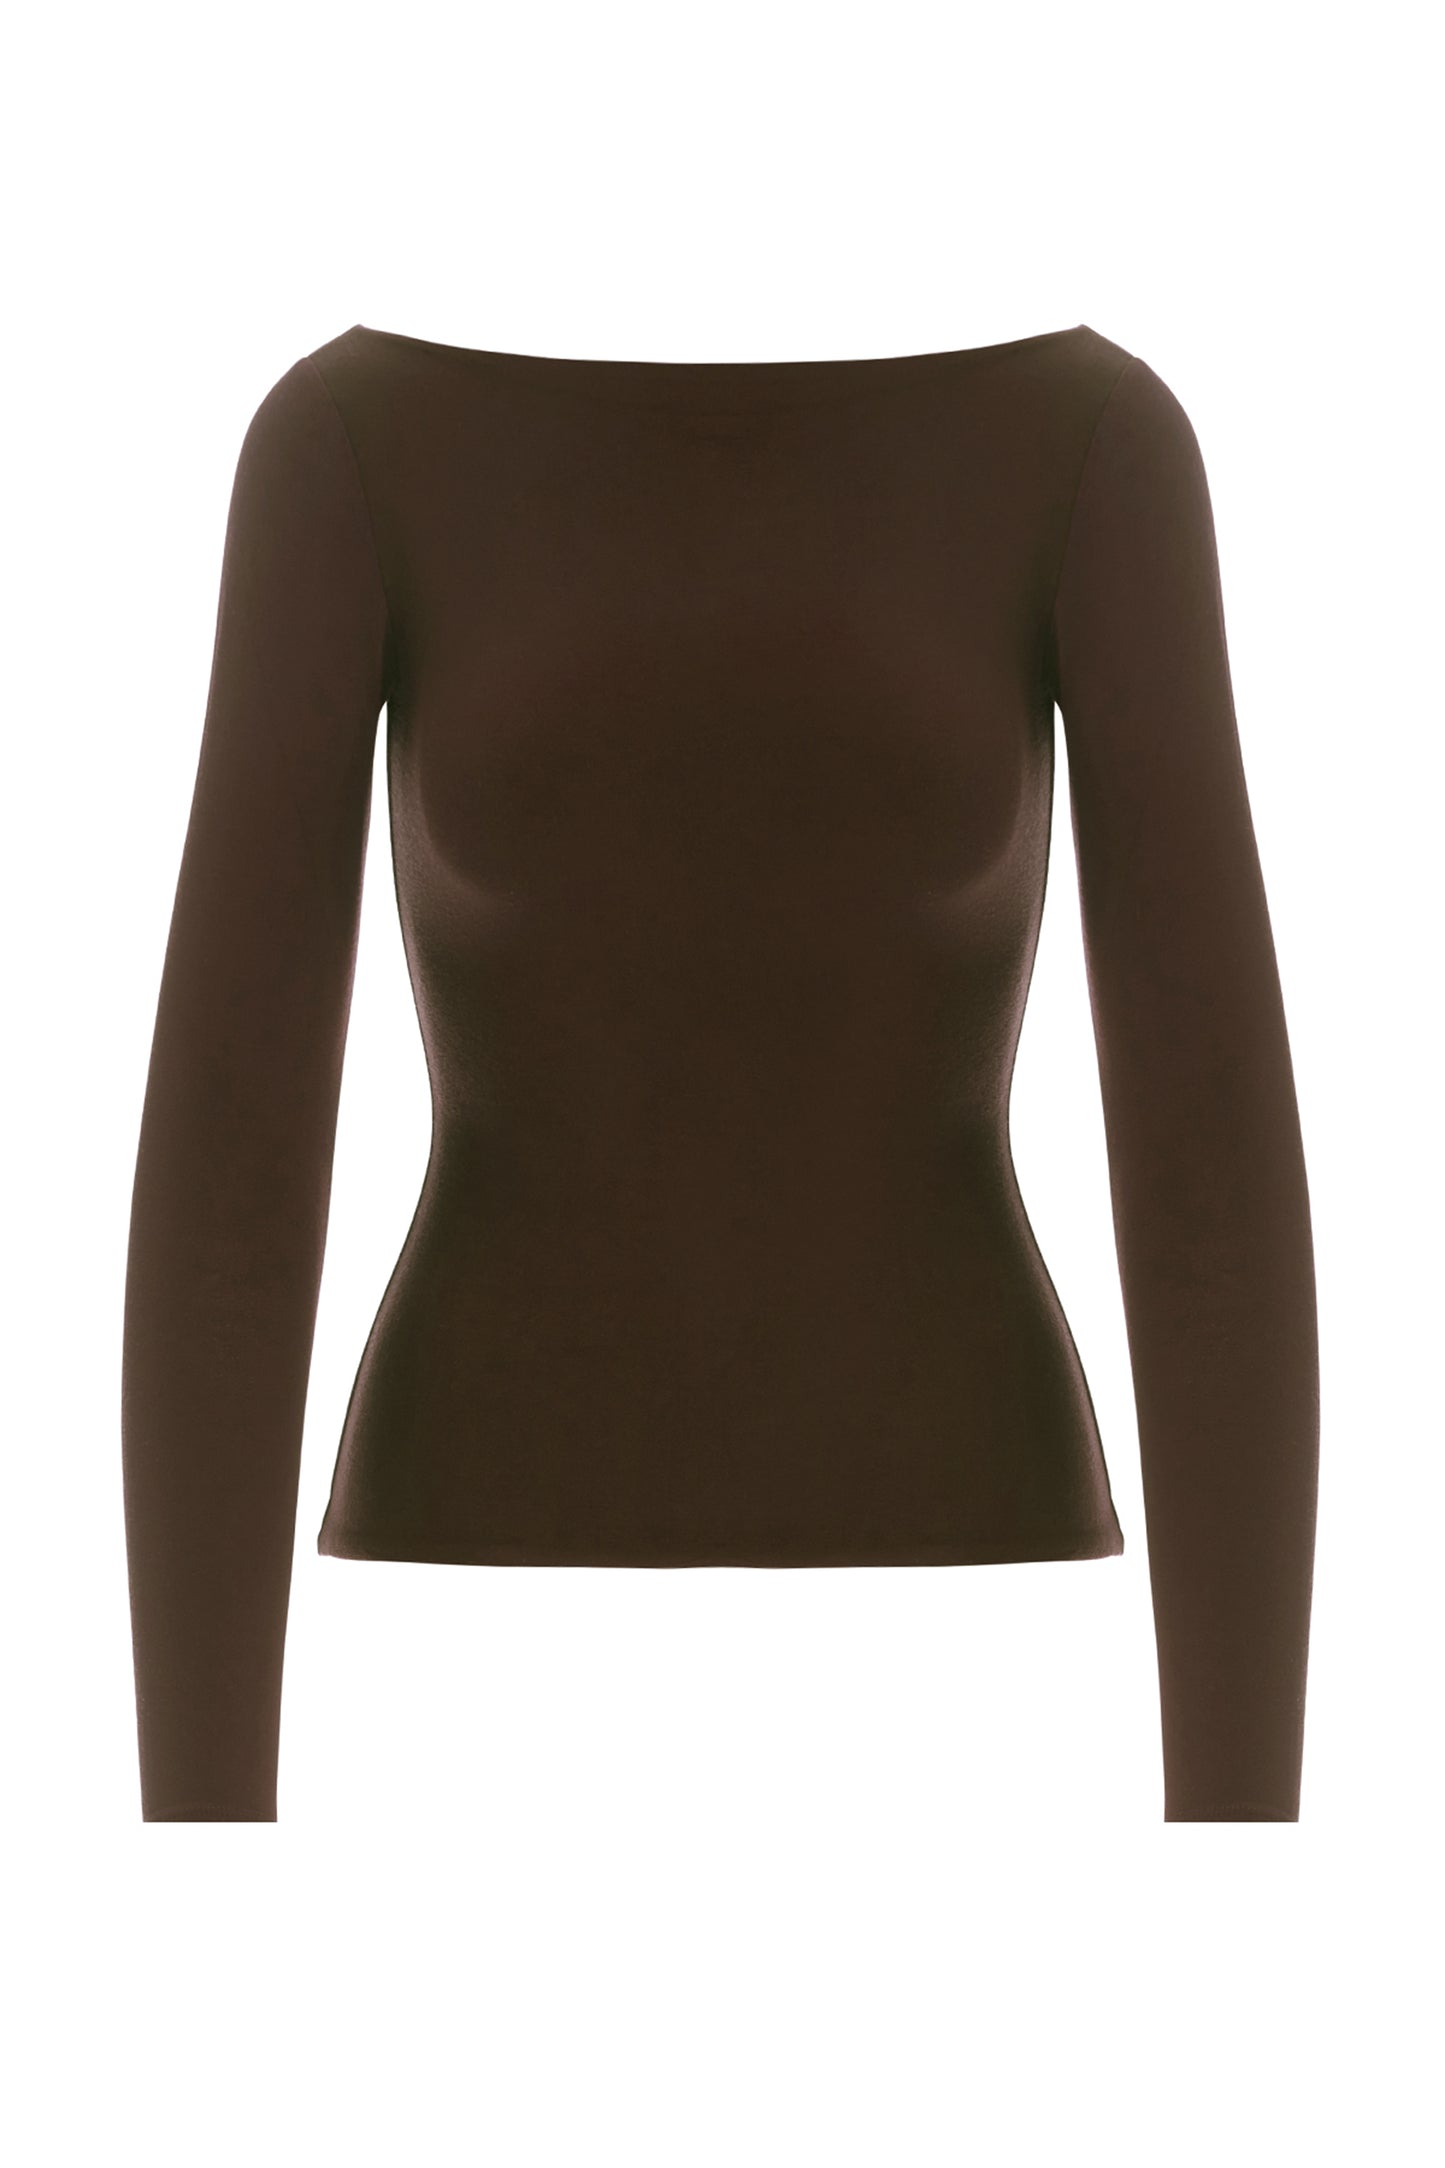 NW Boatneck Bodycon Top